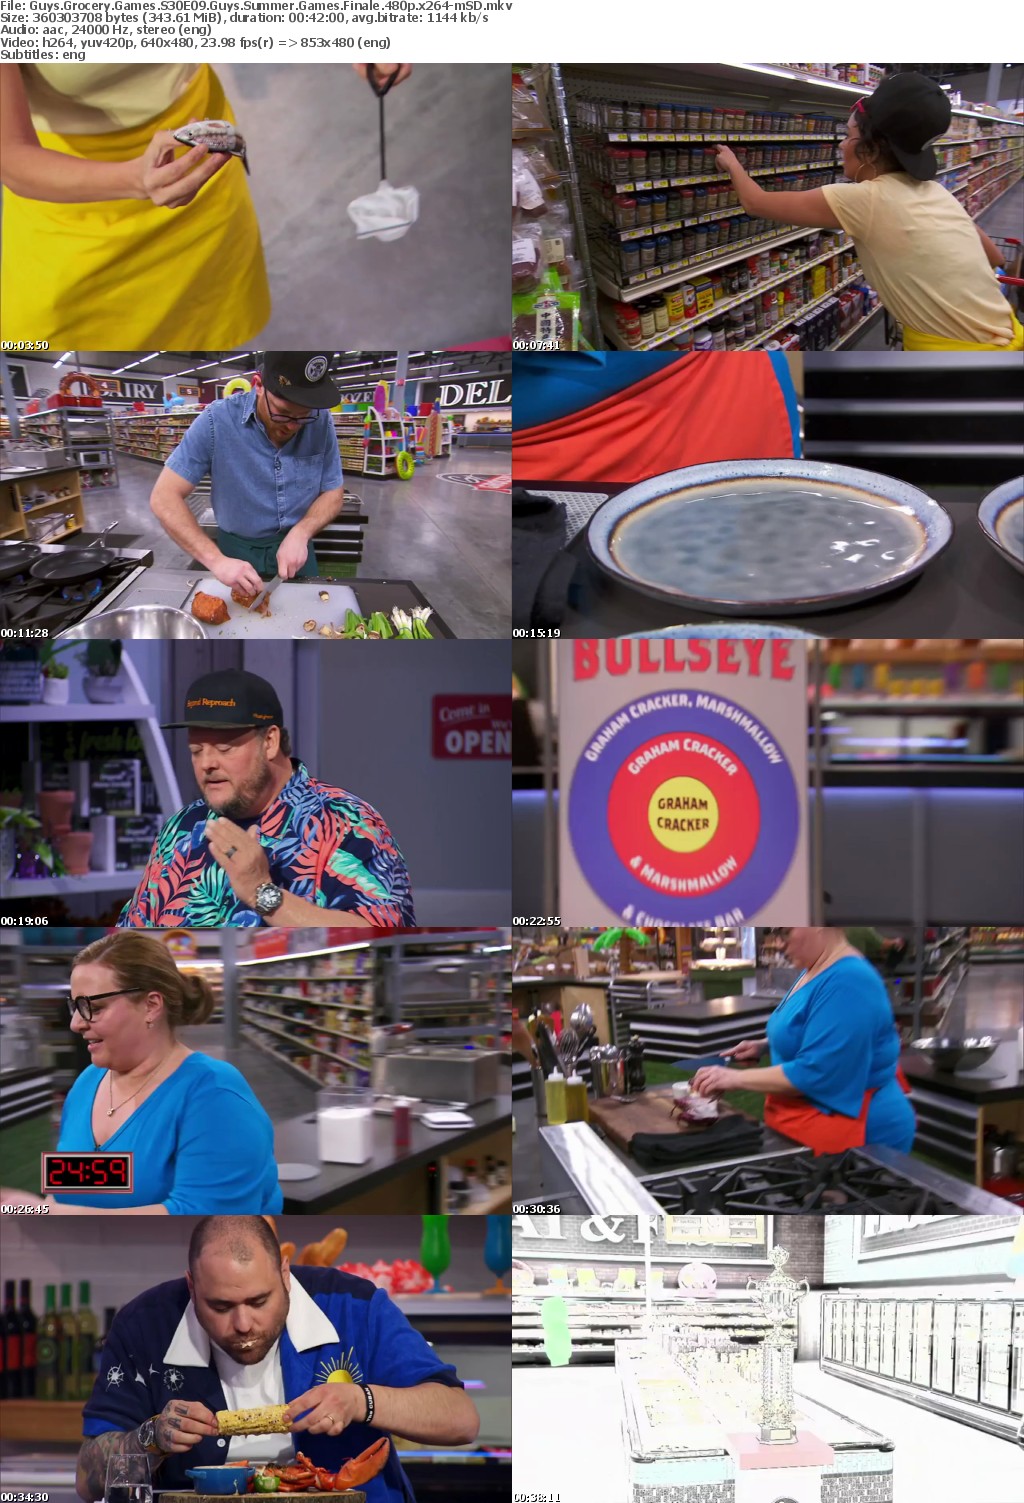 Guys Grocery Games S30E09 Guys Summer Games Finale 480p x264-mSD